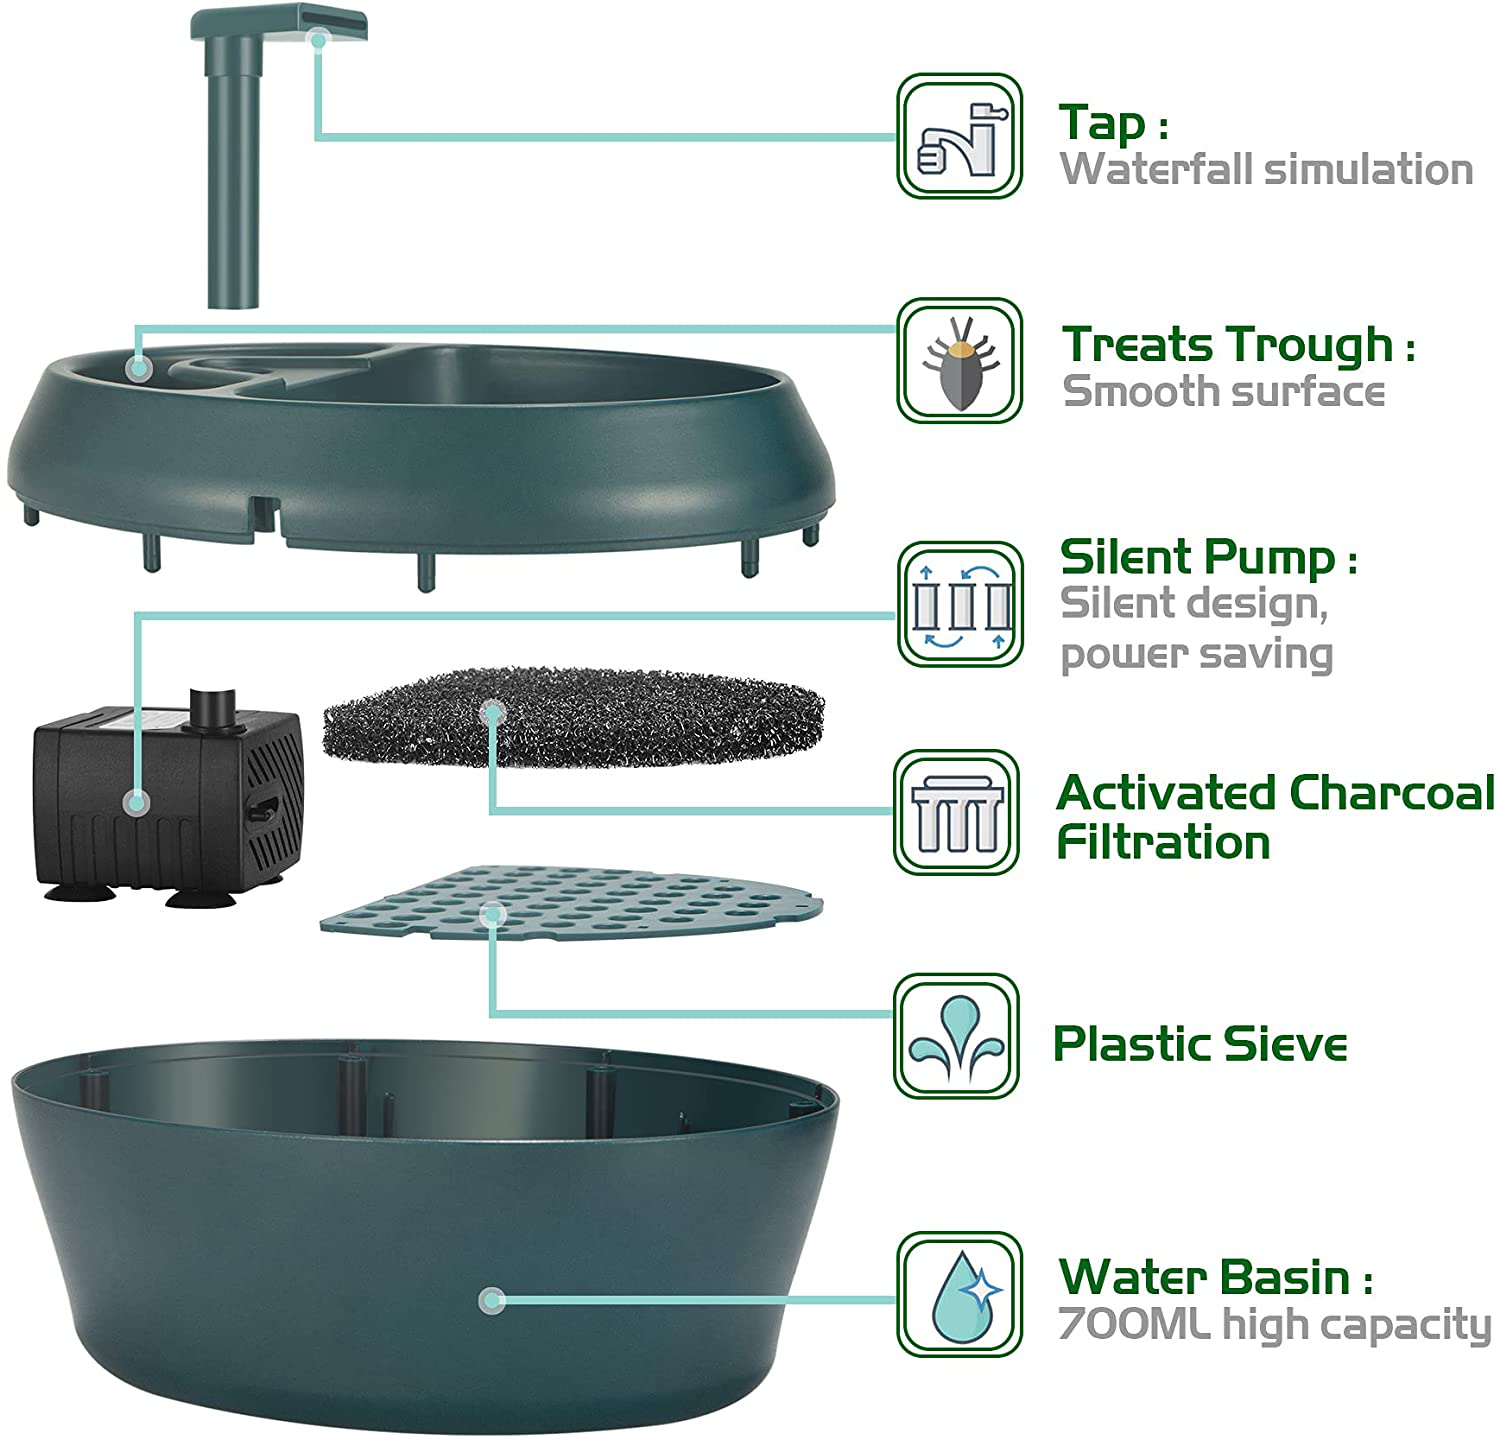 NEPTONION Reptile Chameleon Cantina with Snacks Trough, Drinking Fountain Water Dripper for Amphibians Insects Lizard Turtle Snake Spider Frog Gecko, Comes with Two Pumps (One for Replacement)